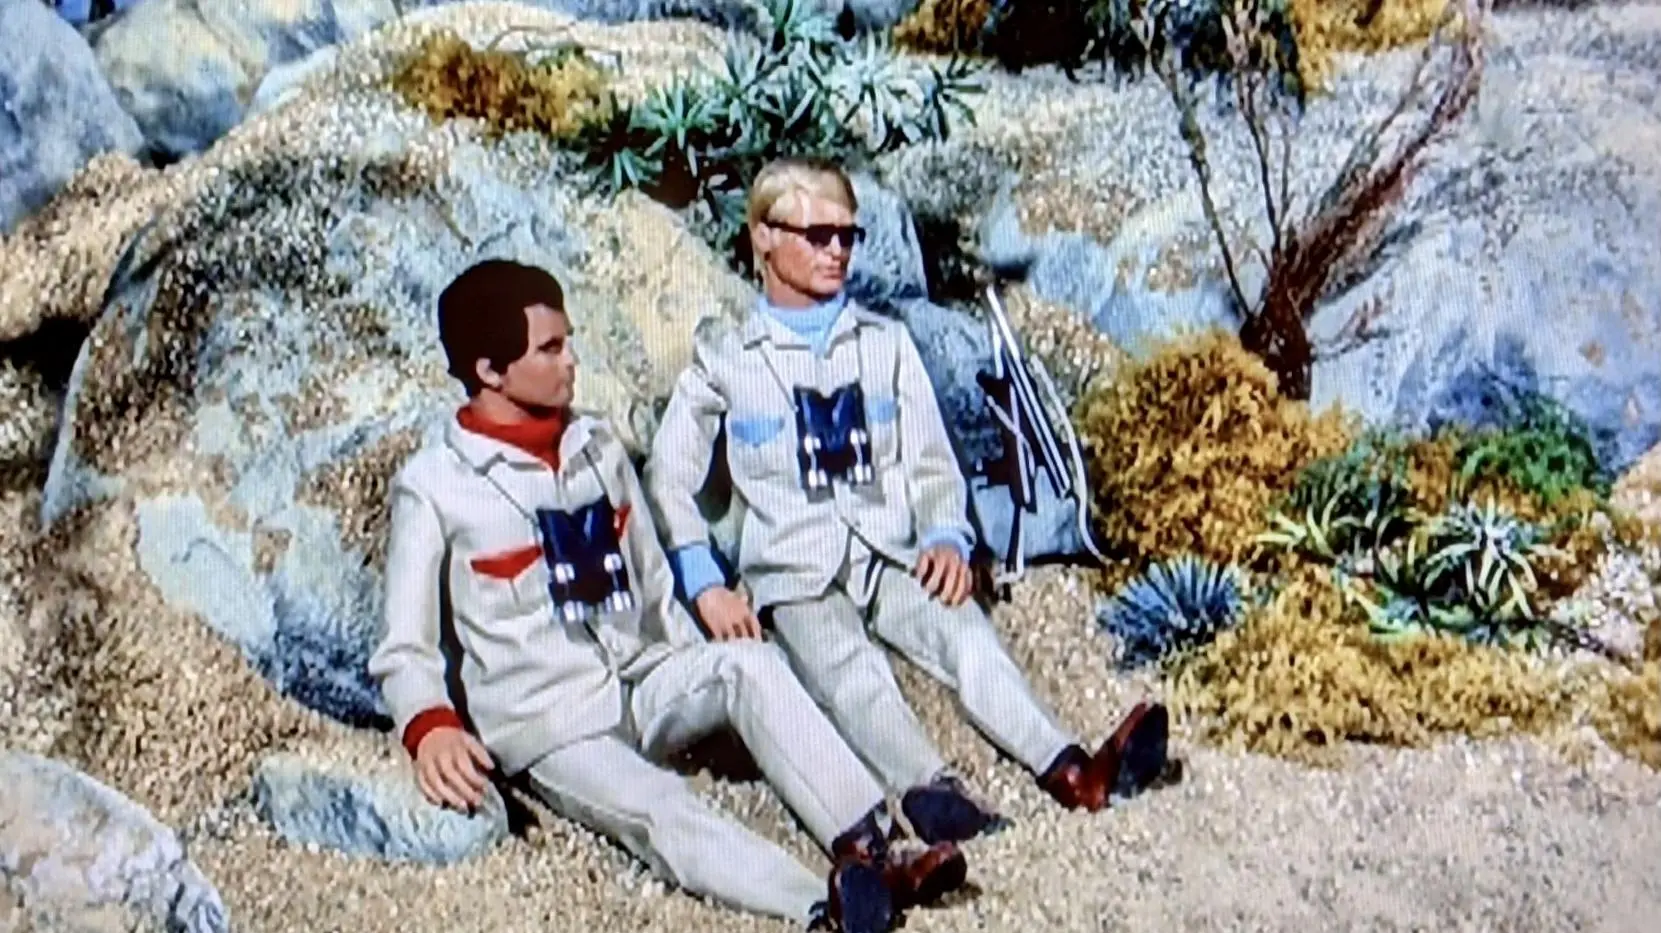 Captain Scarlet and the Mysterons_peliplat